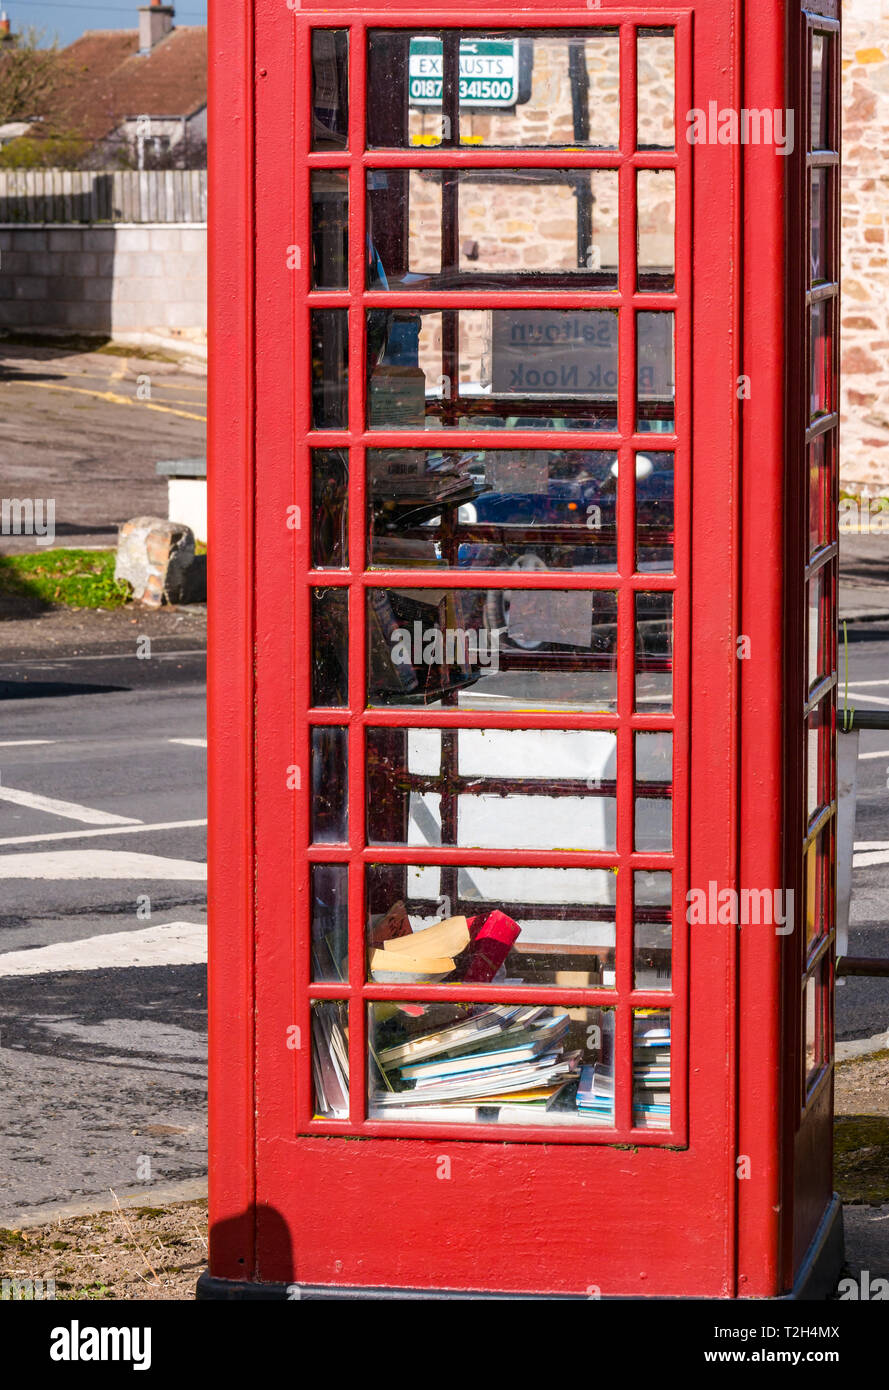 Old red telephone box converted to book lending library in conservation village, East Saltoun, East Lothian, Scotland, UK Stock Photo